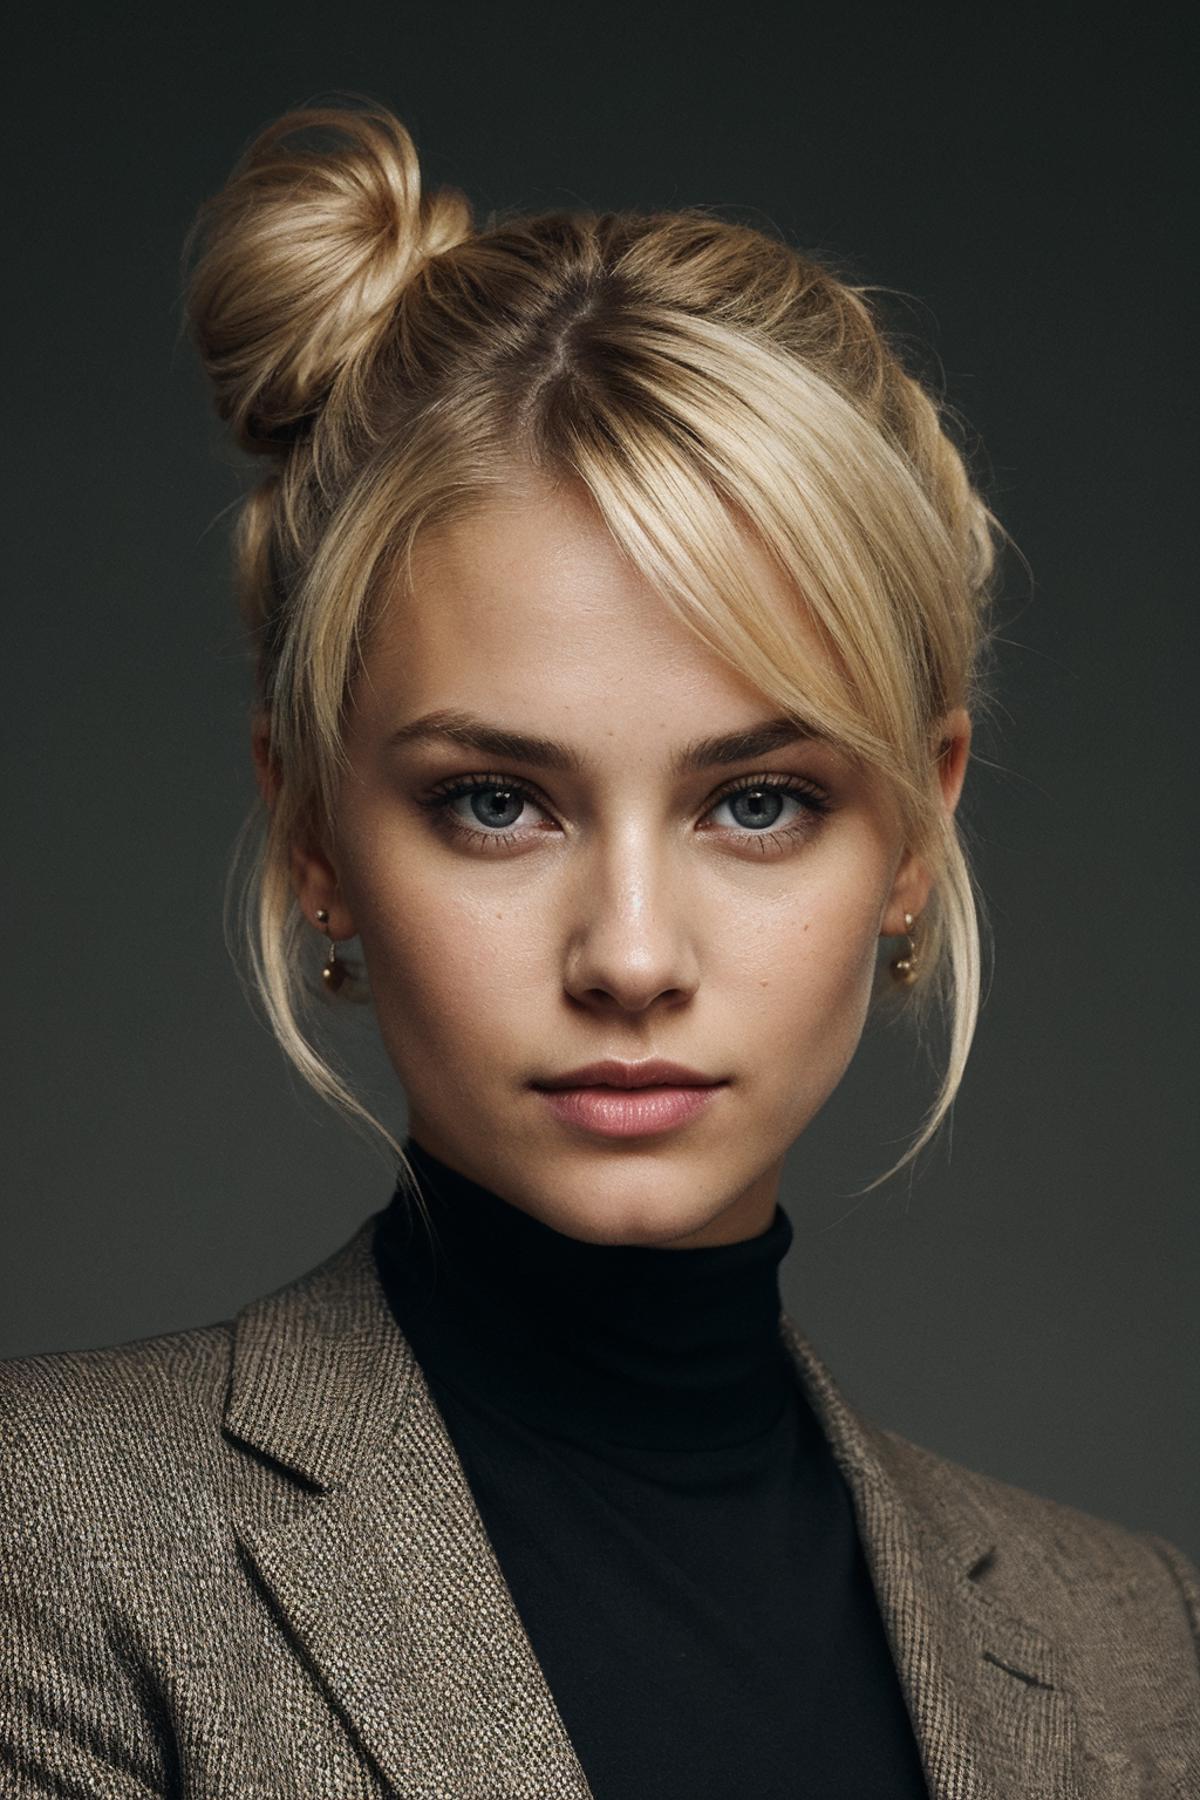 Blonde Woman with a Bun in Her Hair and Earring in Her Ear.